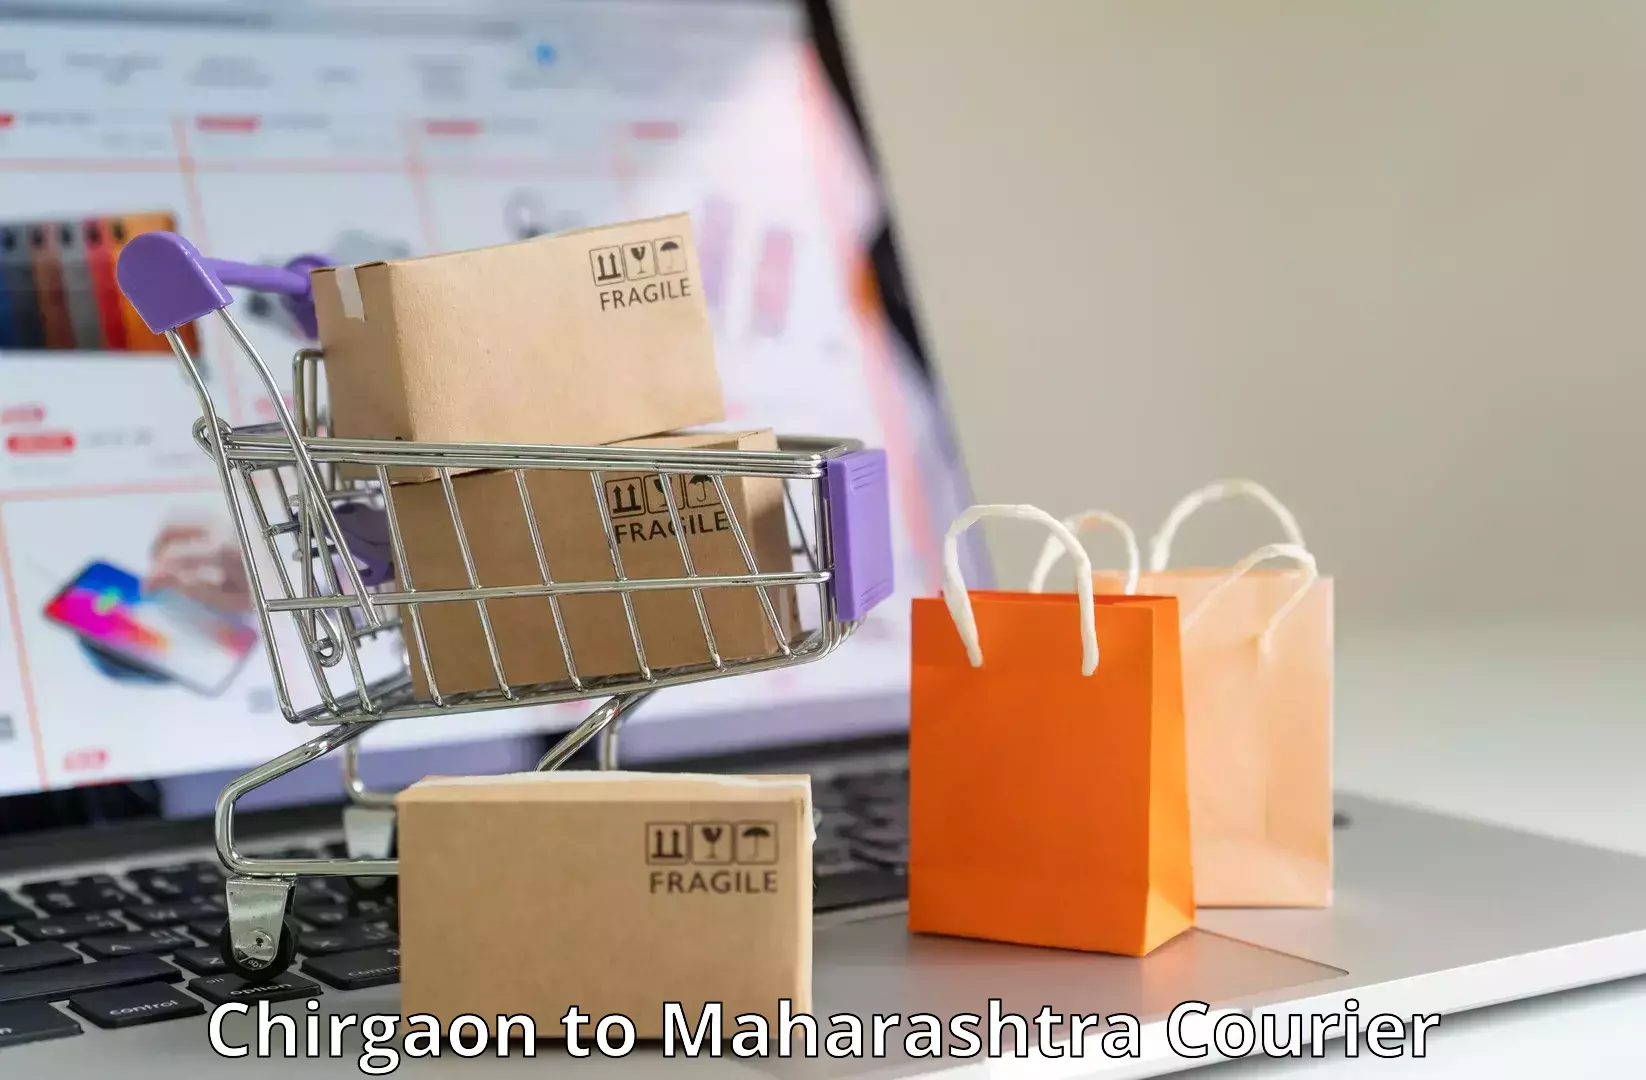 Fast delivery service Chirgaon to Yeola